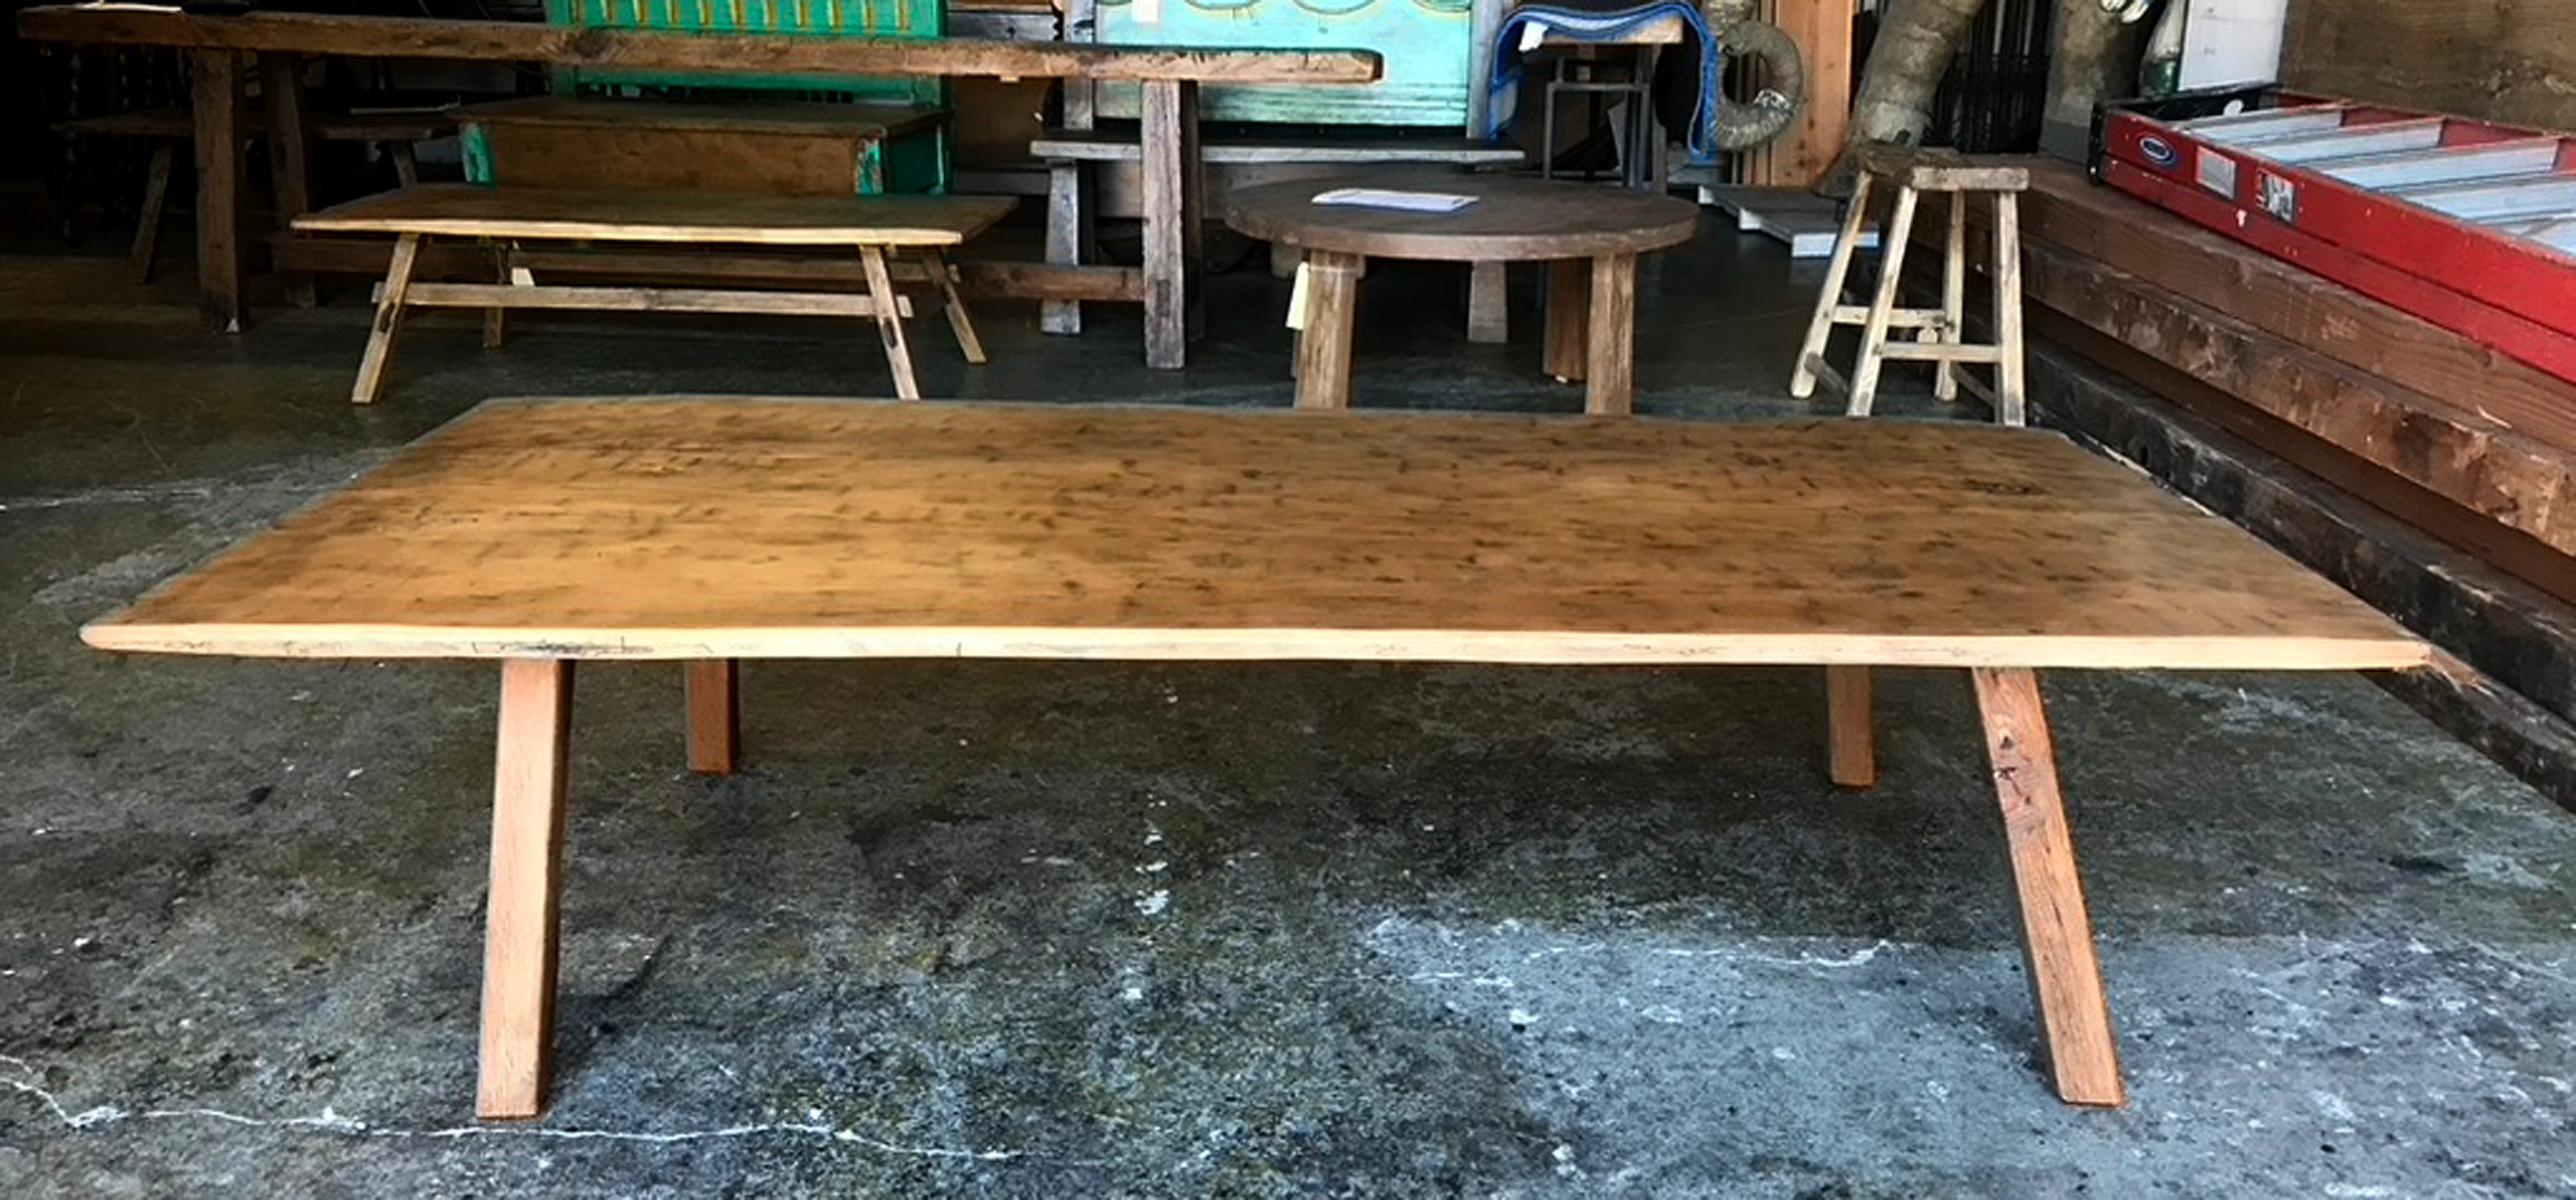 Rustic coffee table consisting of an antique, hand hewn, one wide board from Guatemala, atop contemporary legs, finished to match the top. The top has great patina and interest. It shows age appropriate wear, please see close up photos. Construction